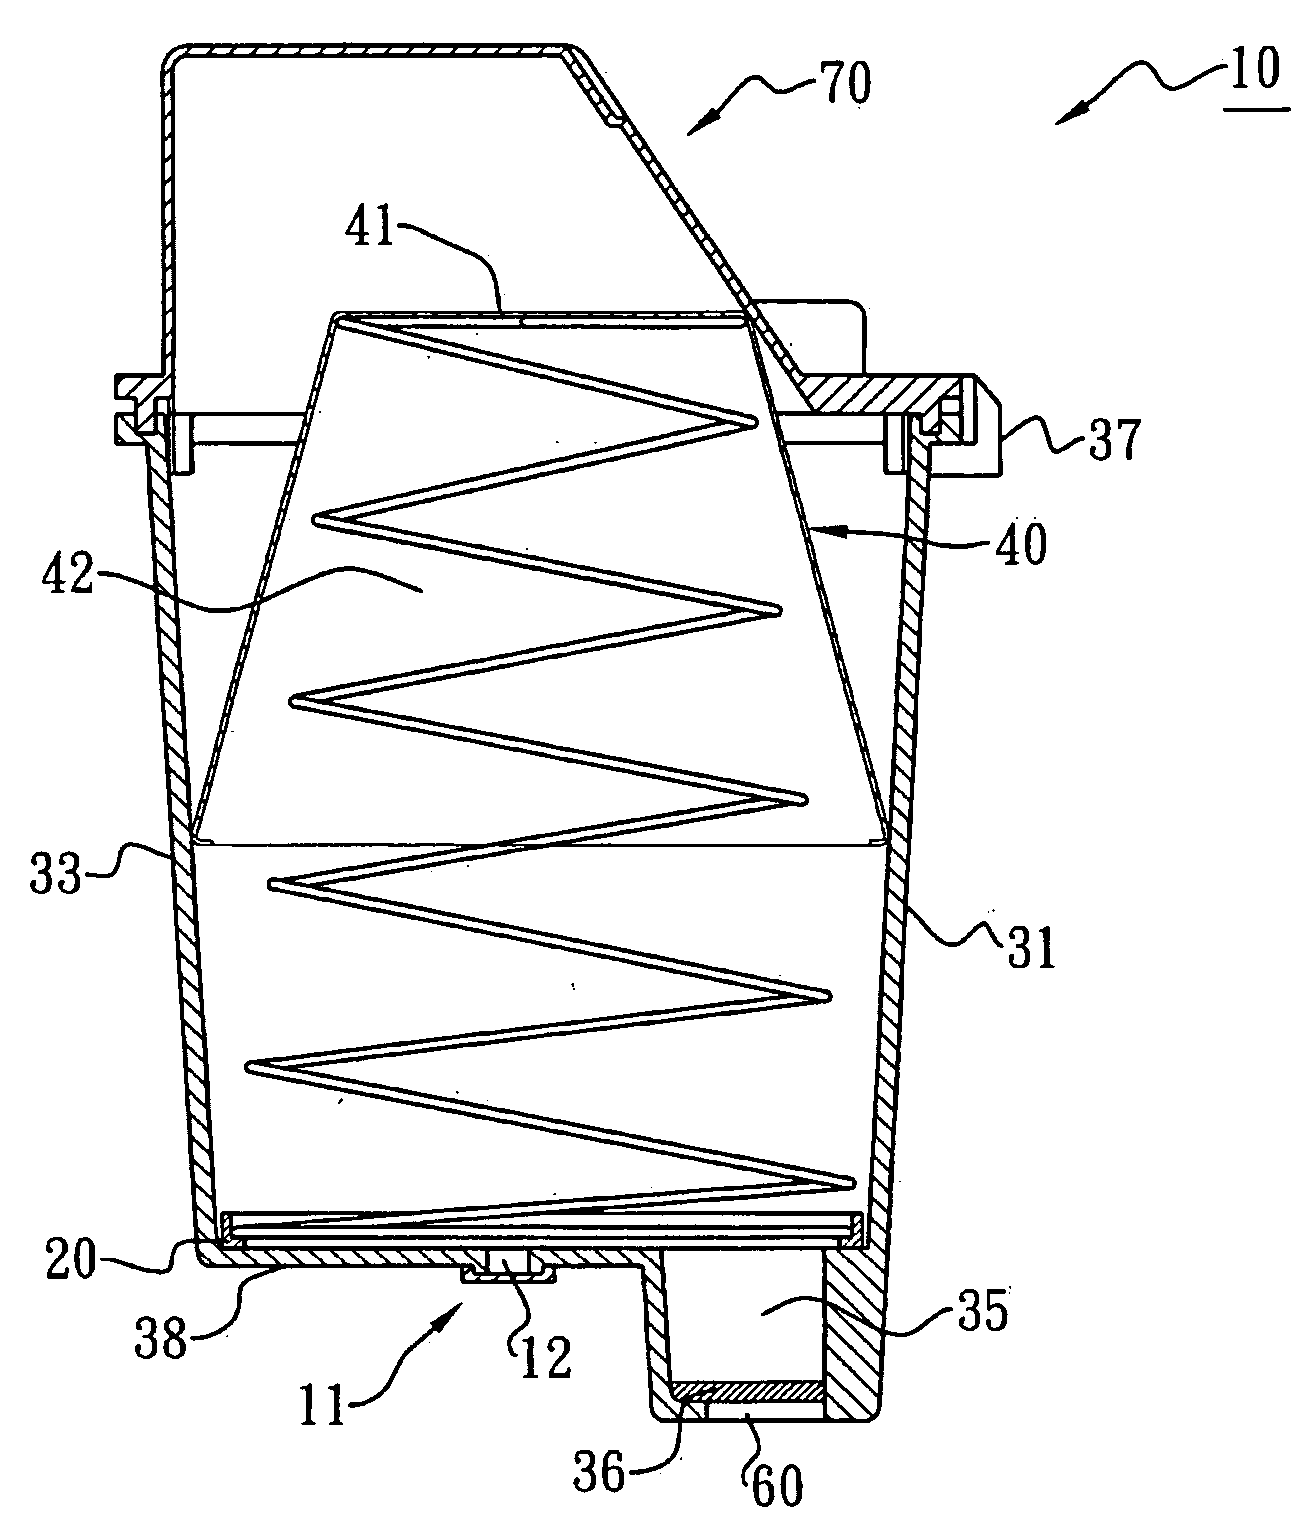 Ink-jet printing apparatus with configuration of spring and flexible pocket